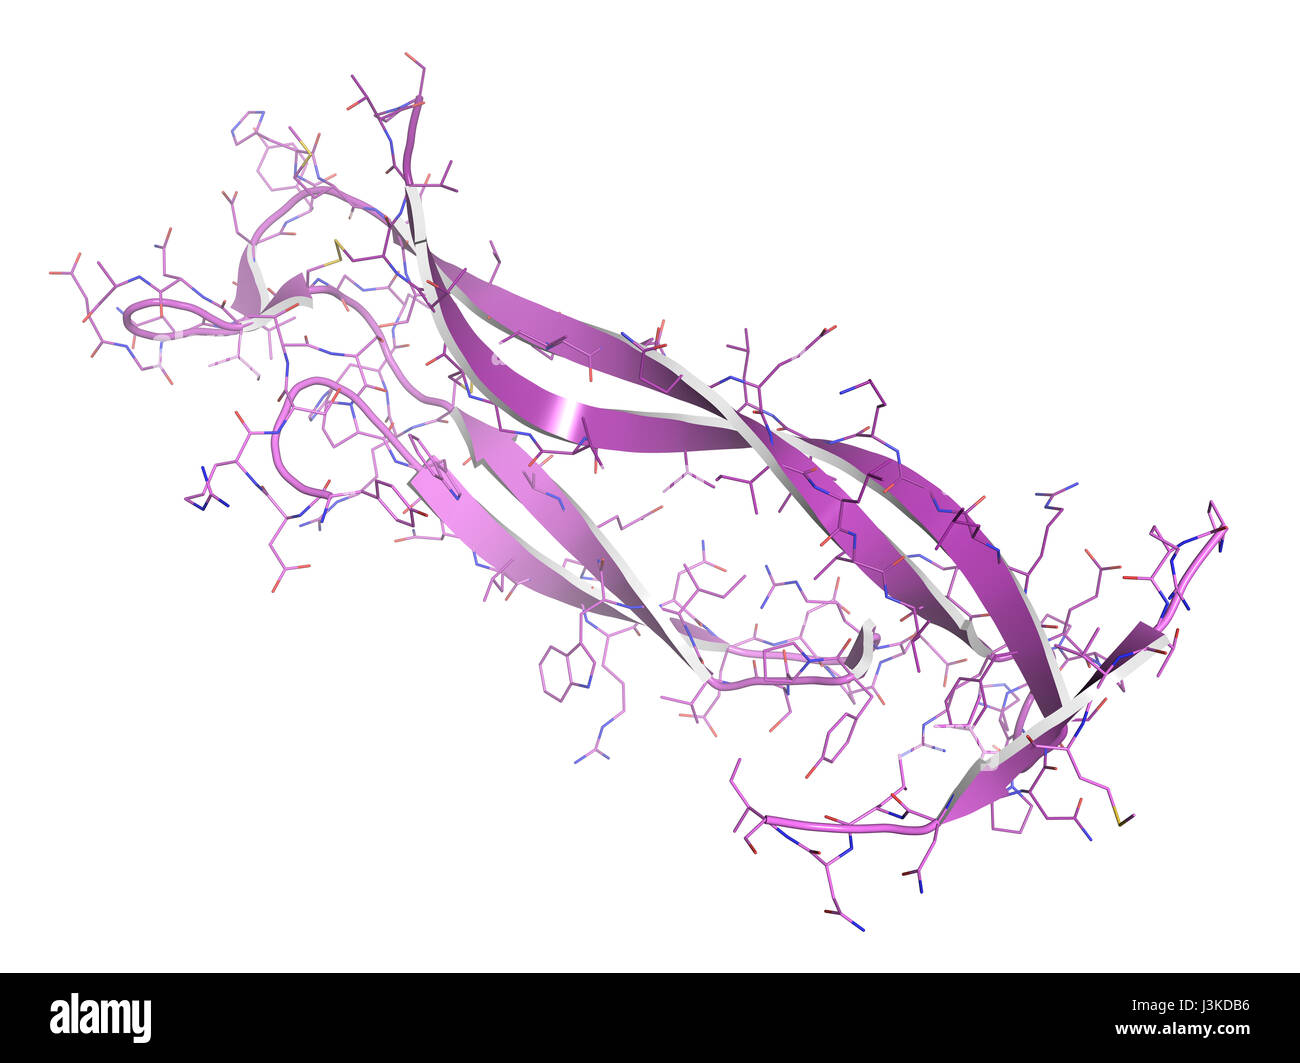 Interleukin 17 (IL-17A, IL-17) cytokine molecule. IL-17 antibodies are evaluated for the treatment of psoriasis and other diseases. Cartoon + line mod Stock Photo